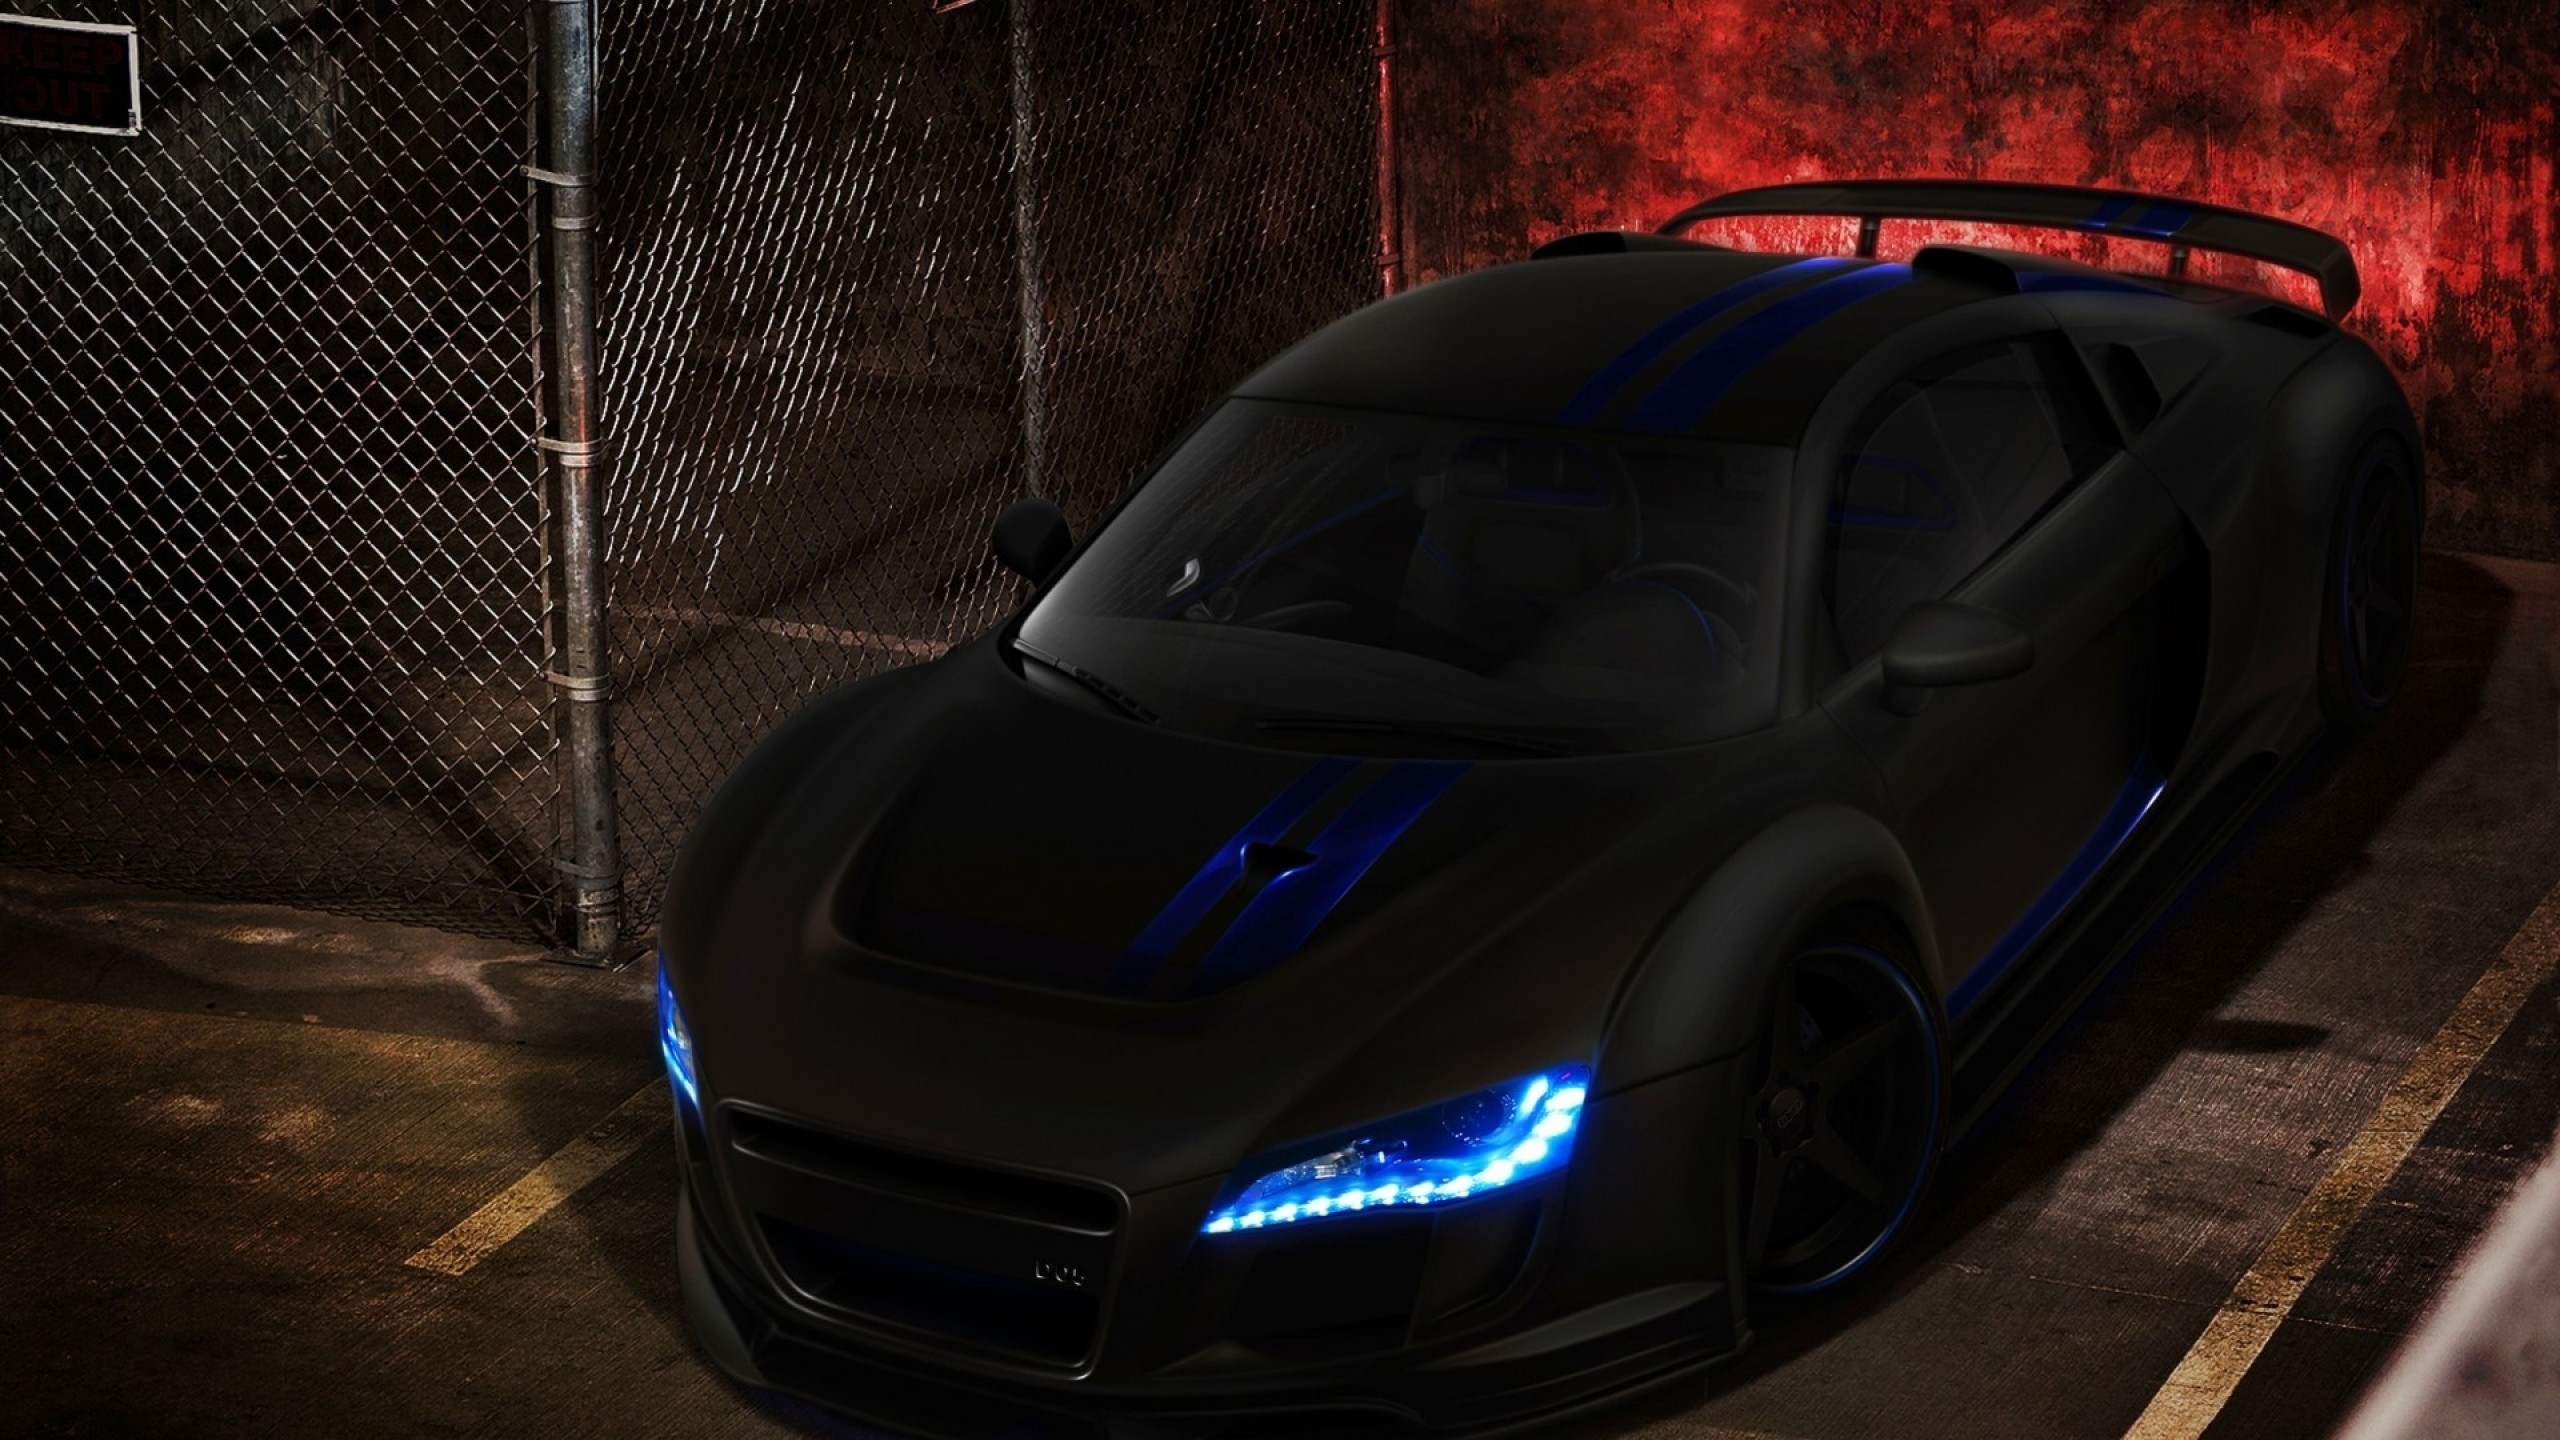 2560x1440 Audia R8 in matte black with cool lights #audi #r8 #wallpapers www.yours- cars.eu | Rides | Pinterest | Audi r8 wallpaper, Audi R8 and Audi